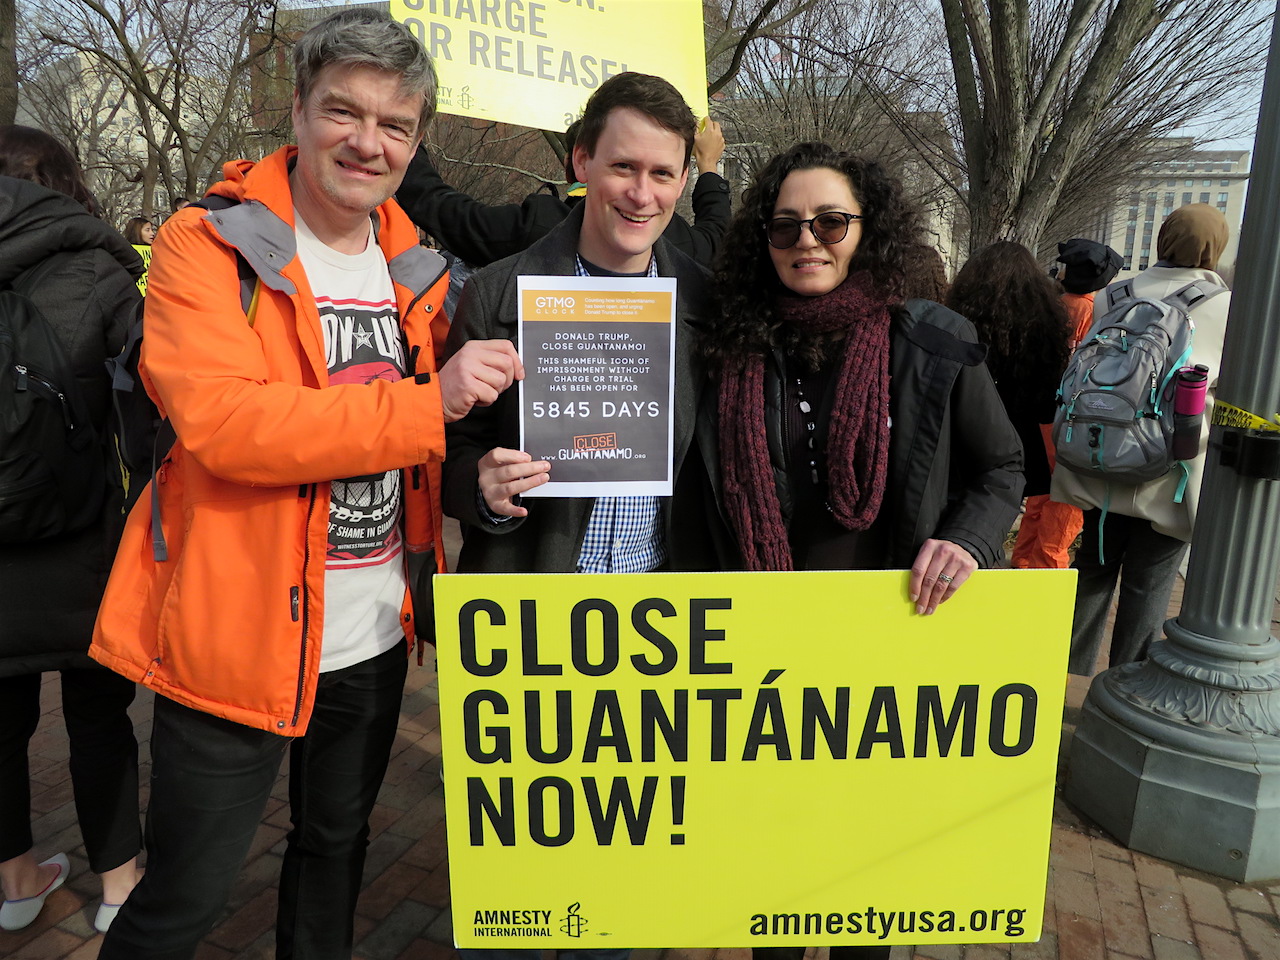 Andy Worthington of Close Guantánamo with Mitch Robinson, international law expert for Mustafa al-Hawsawi, one of five "high-value detainees" at Guantánamo accused of involvement in the 9/11 attacks, and Daphne Eviatar of Amnesty International USA call on Donald Trump to close Guantánamo at the annual rally outside the White House on January 11, 2018, the 16th anniversary of the opening of the prison. They were supporting the new Close Guantánamo initiative, counting how many days Guantánamo has been open — a shocking total of 5,845 days on the anniversary.